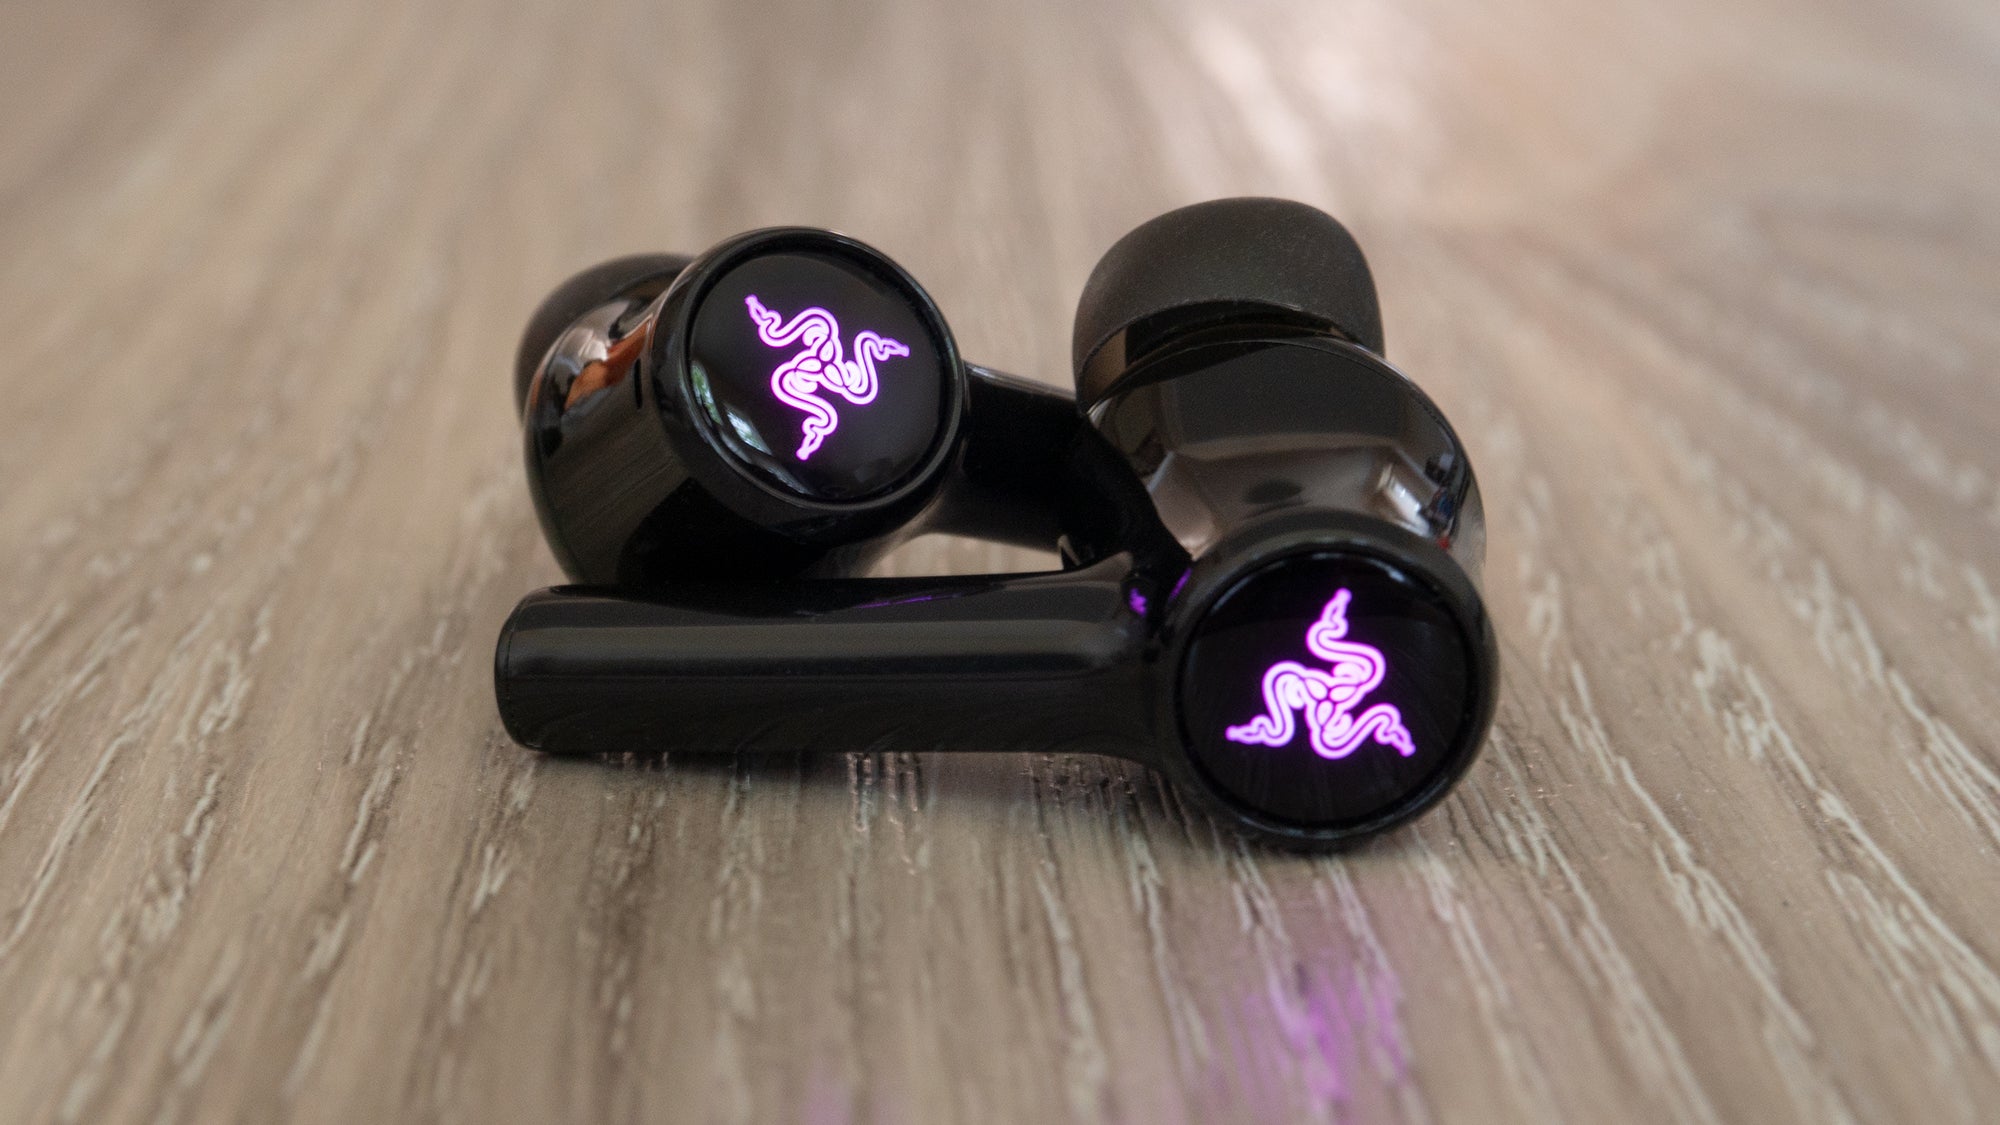 Don't expect other wireless earbud makers to copy the colour-changing LED feature Razer has included. (Photo: Andrew Liszewski - Gizmodo)